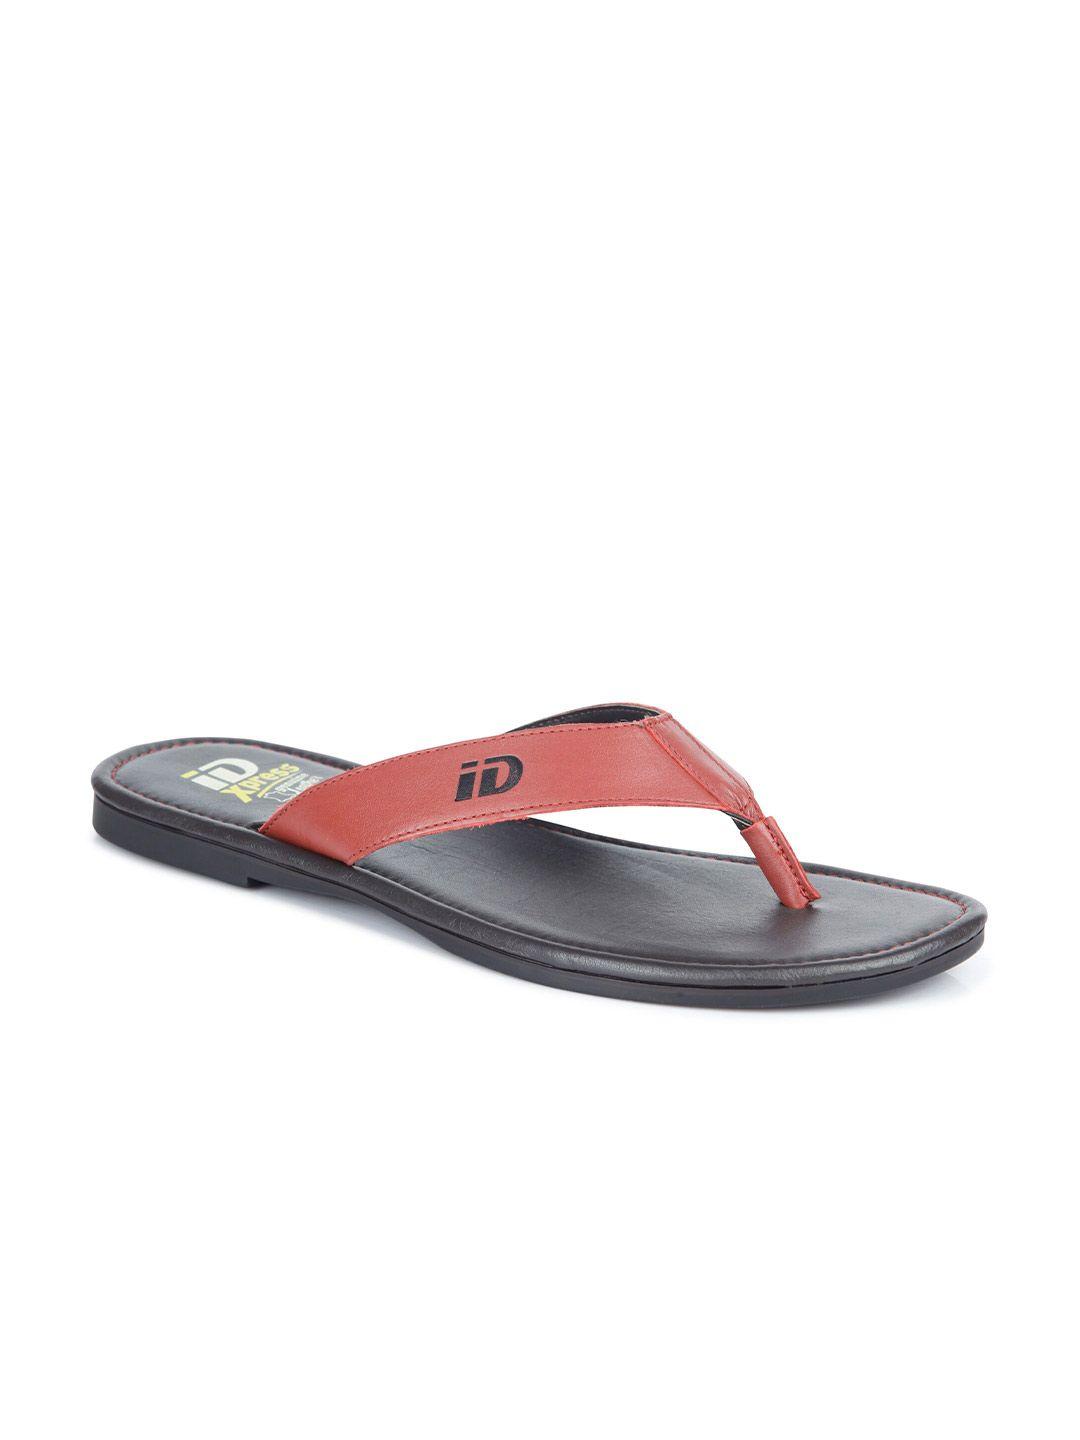 id men red & black leather comfort thong  sandals